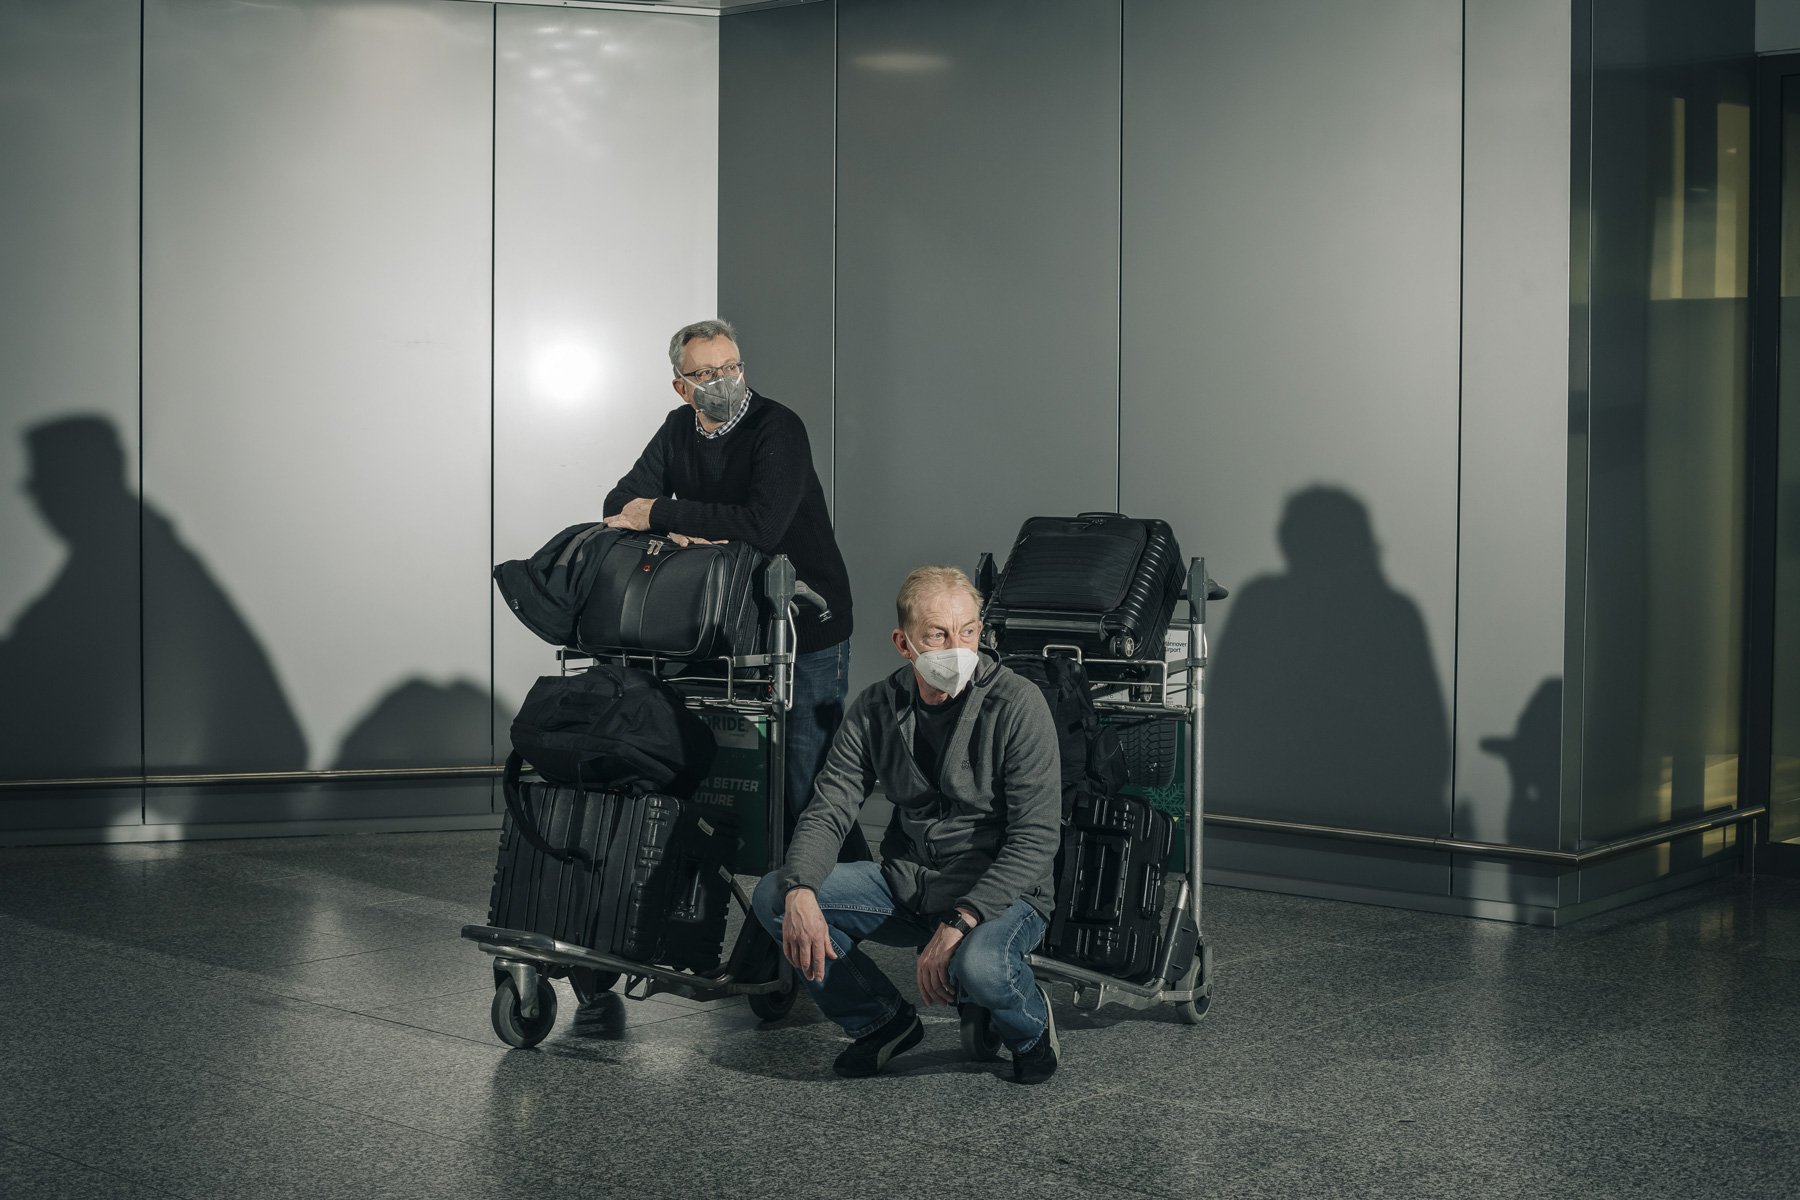  Two workers with their luggage at the airport hannover. Due to their job, they fly to Thaiwan for to set up a machine there. They are forced to go to a quarantine hotel for 14 days, despite vaccination and a negative PCR test, before they are allowe